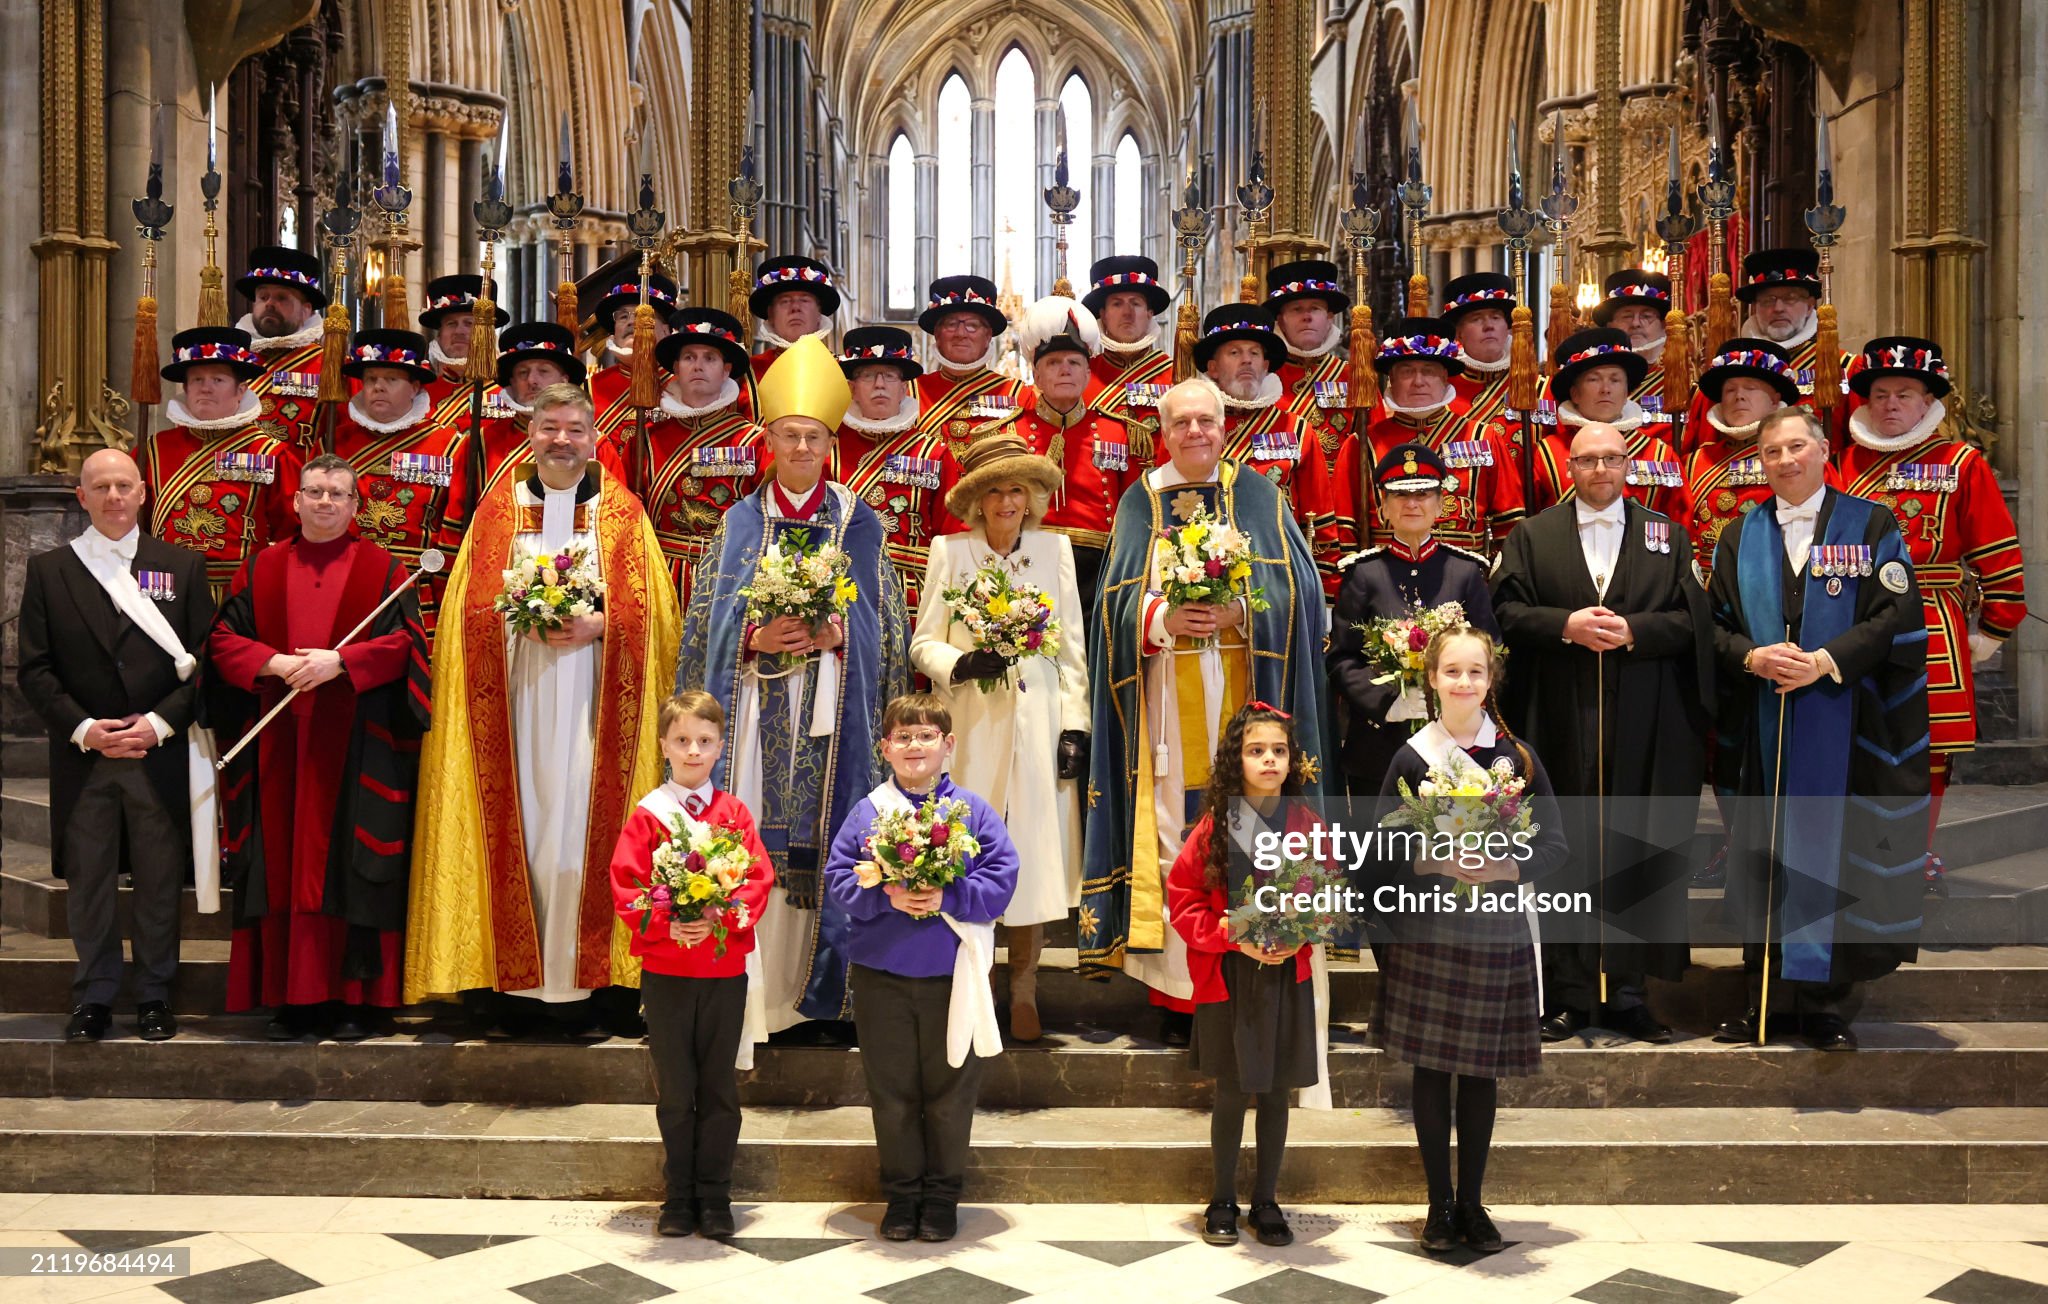 queen-camilla-attends-the-royal-maundy-service-at-worcester-cathedral.jpg?s=2048x2048&w=gi&k=20&c=s_RVeNw8OMF6P8sg67qxiI4X39ka9c8mTbXSfSZMyrw=